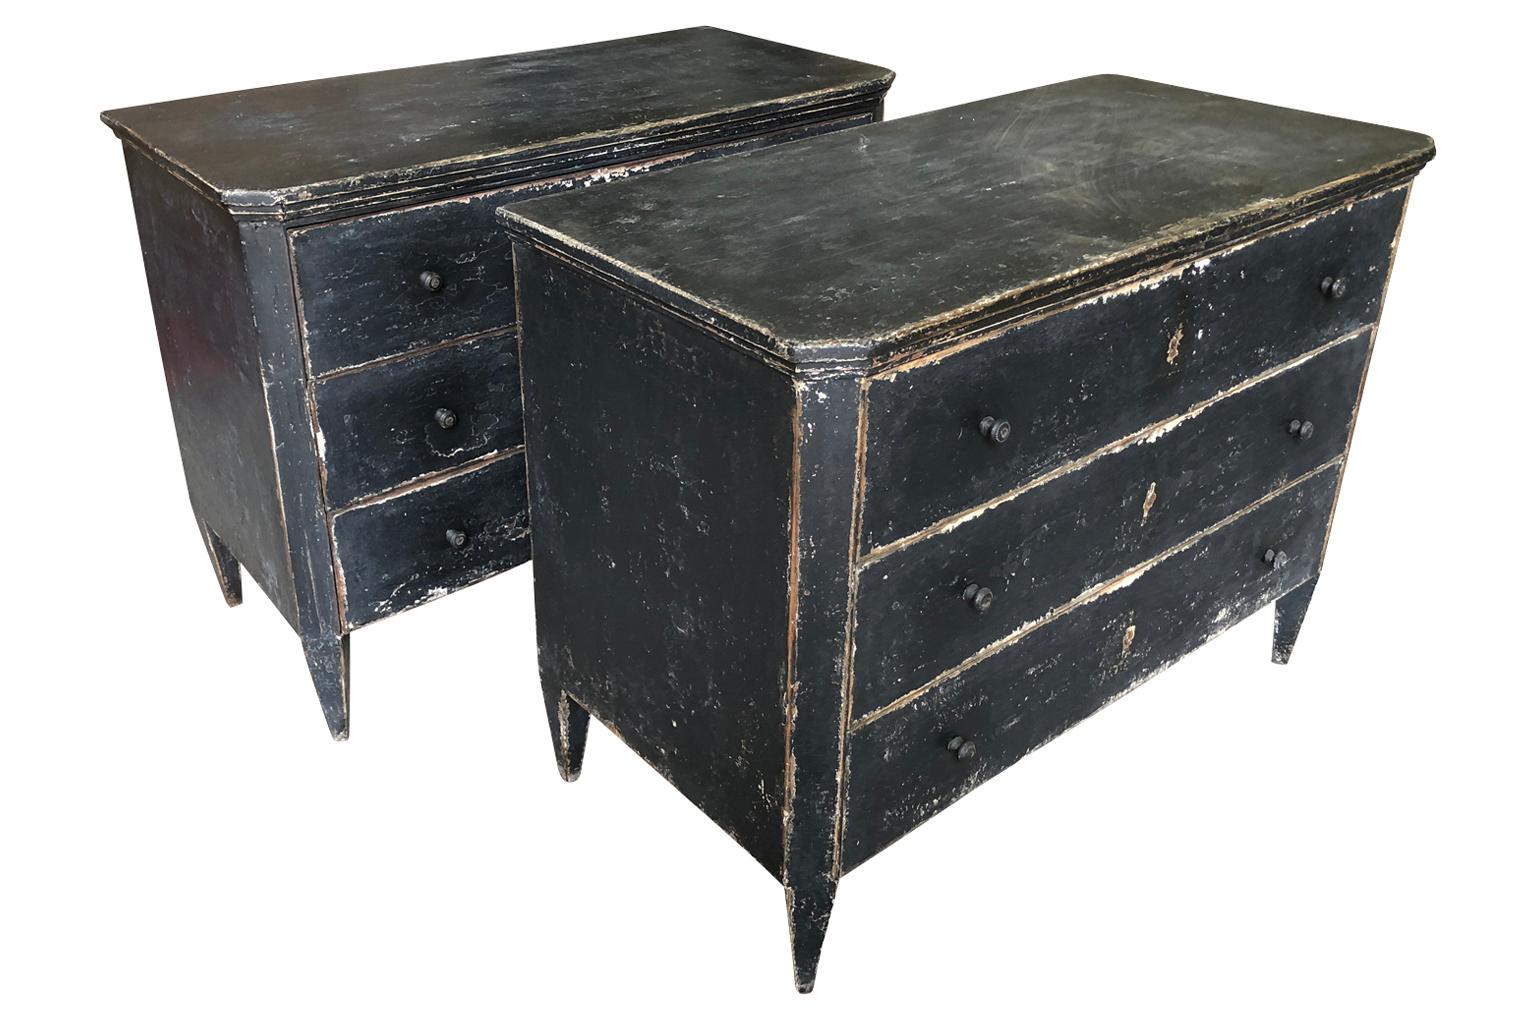 A sensational pair of late 19th century painted commodes from Spain. Great construction with three drawers over tapered legs and edge finish to the top. The painted finish is wonderful with great texture. Great as bedside cabinets or converted into